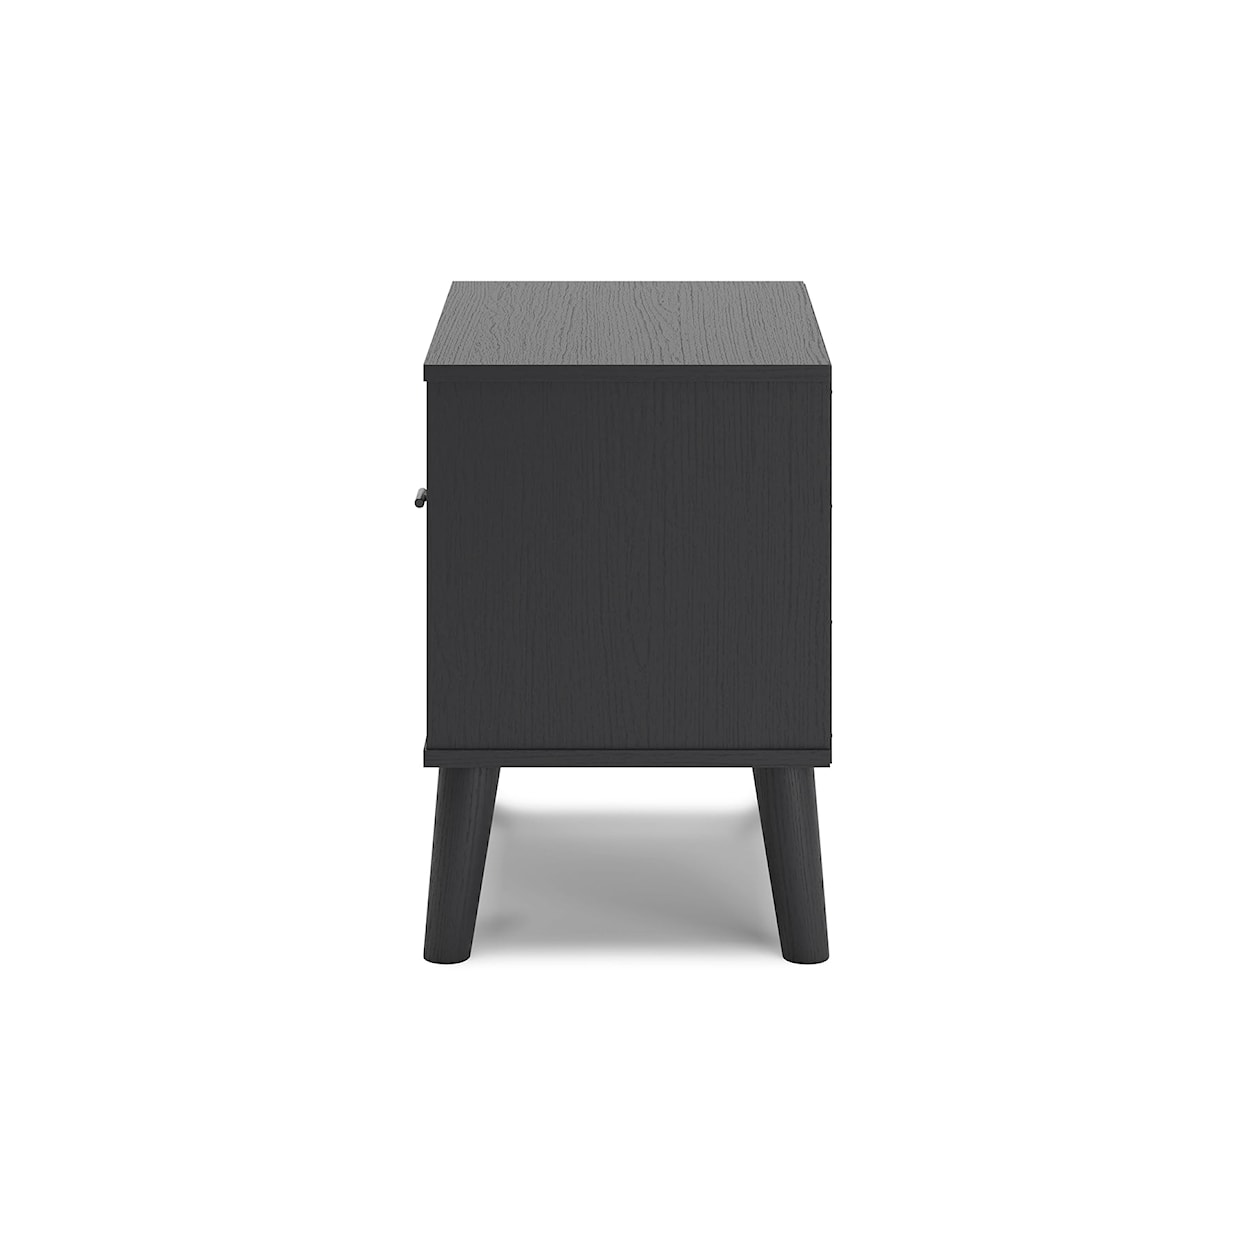 Signature Design by Ashley Charlang 1-Drawer Nightstand